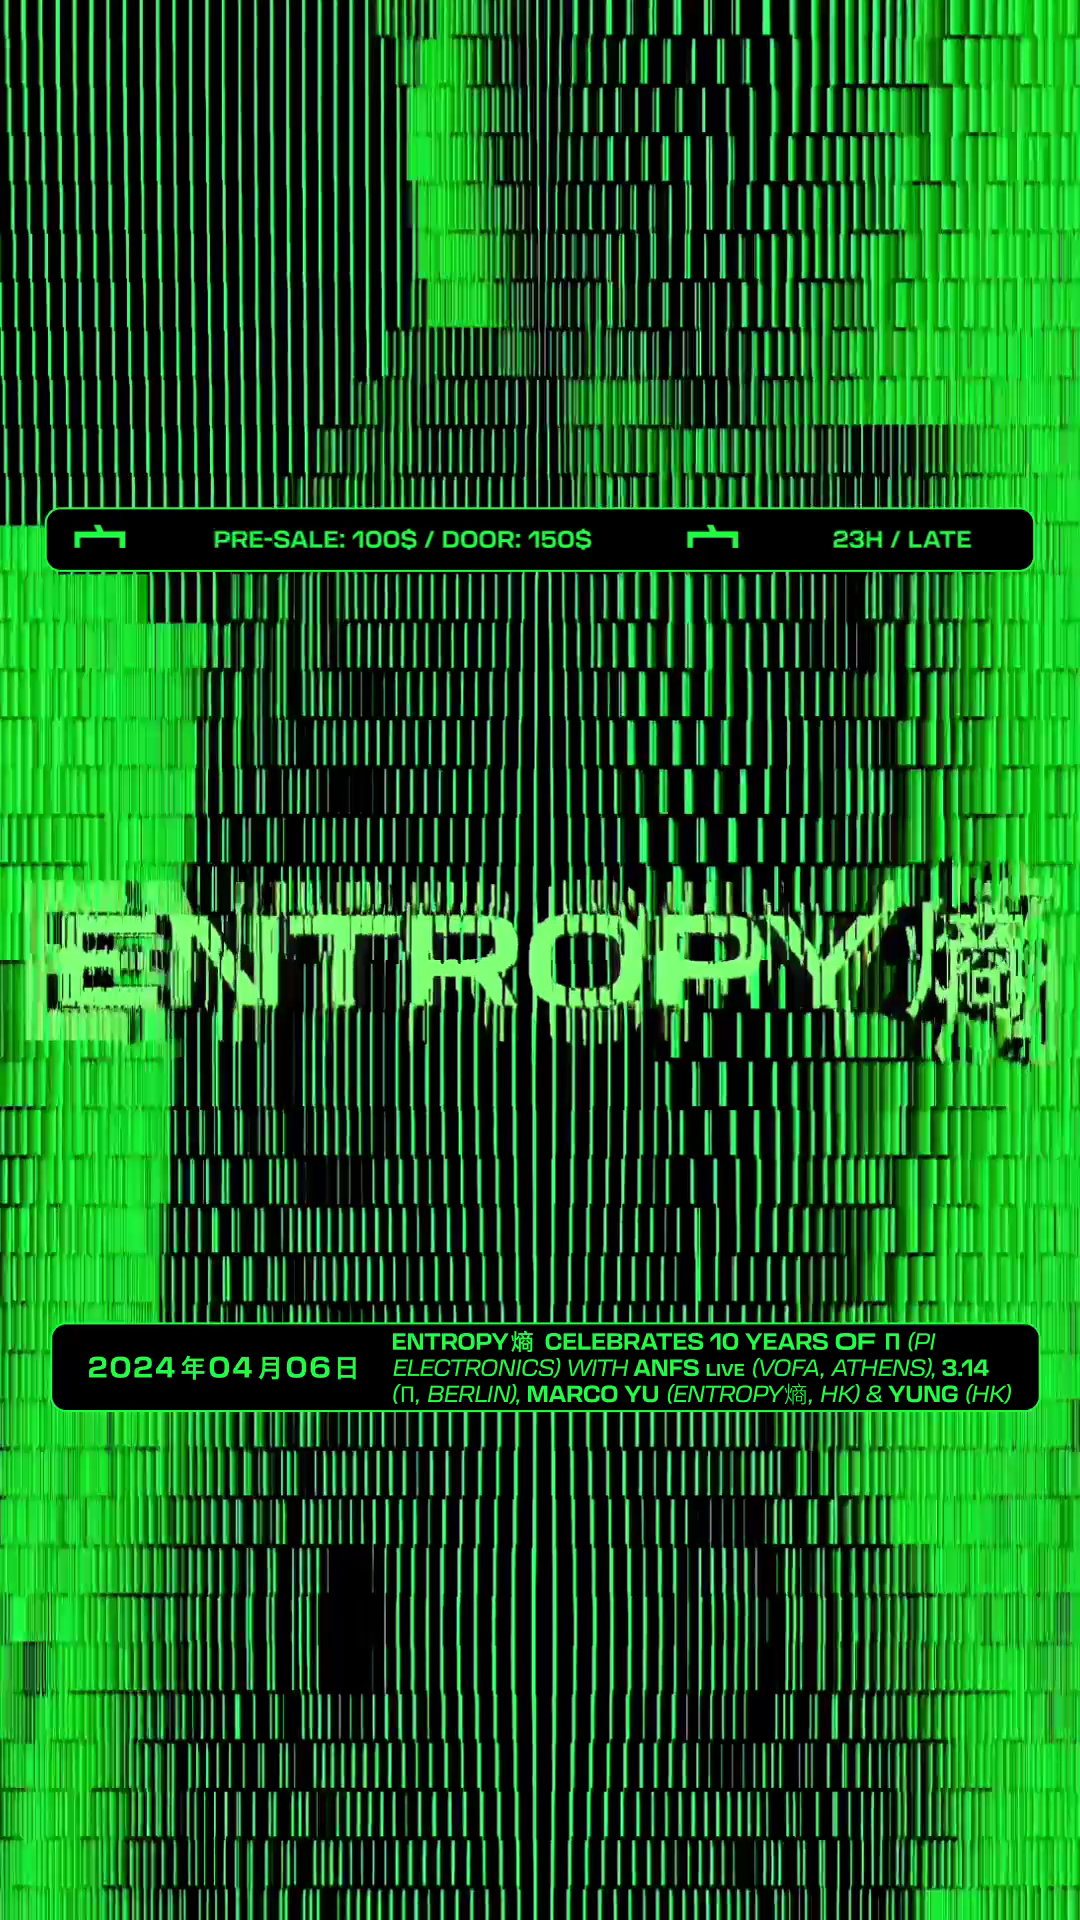 Entropy 熵 Celebrates 10 years of π (Pi Electronics) with ANFS, 3.14, Marco Yu & Yung - Página frontal